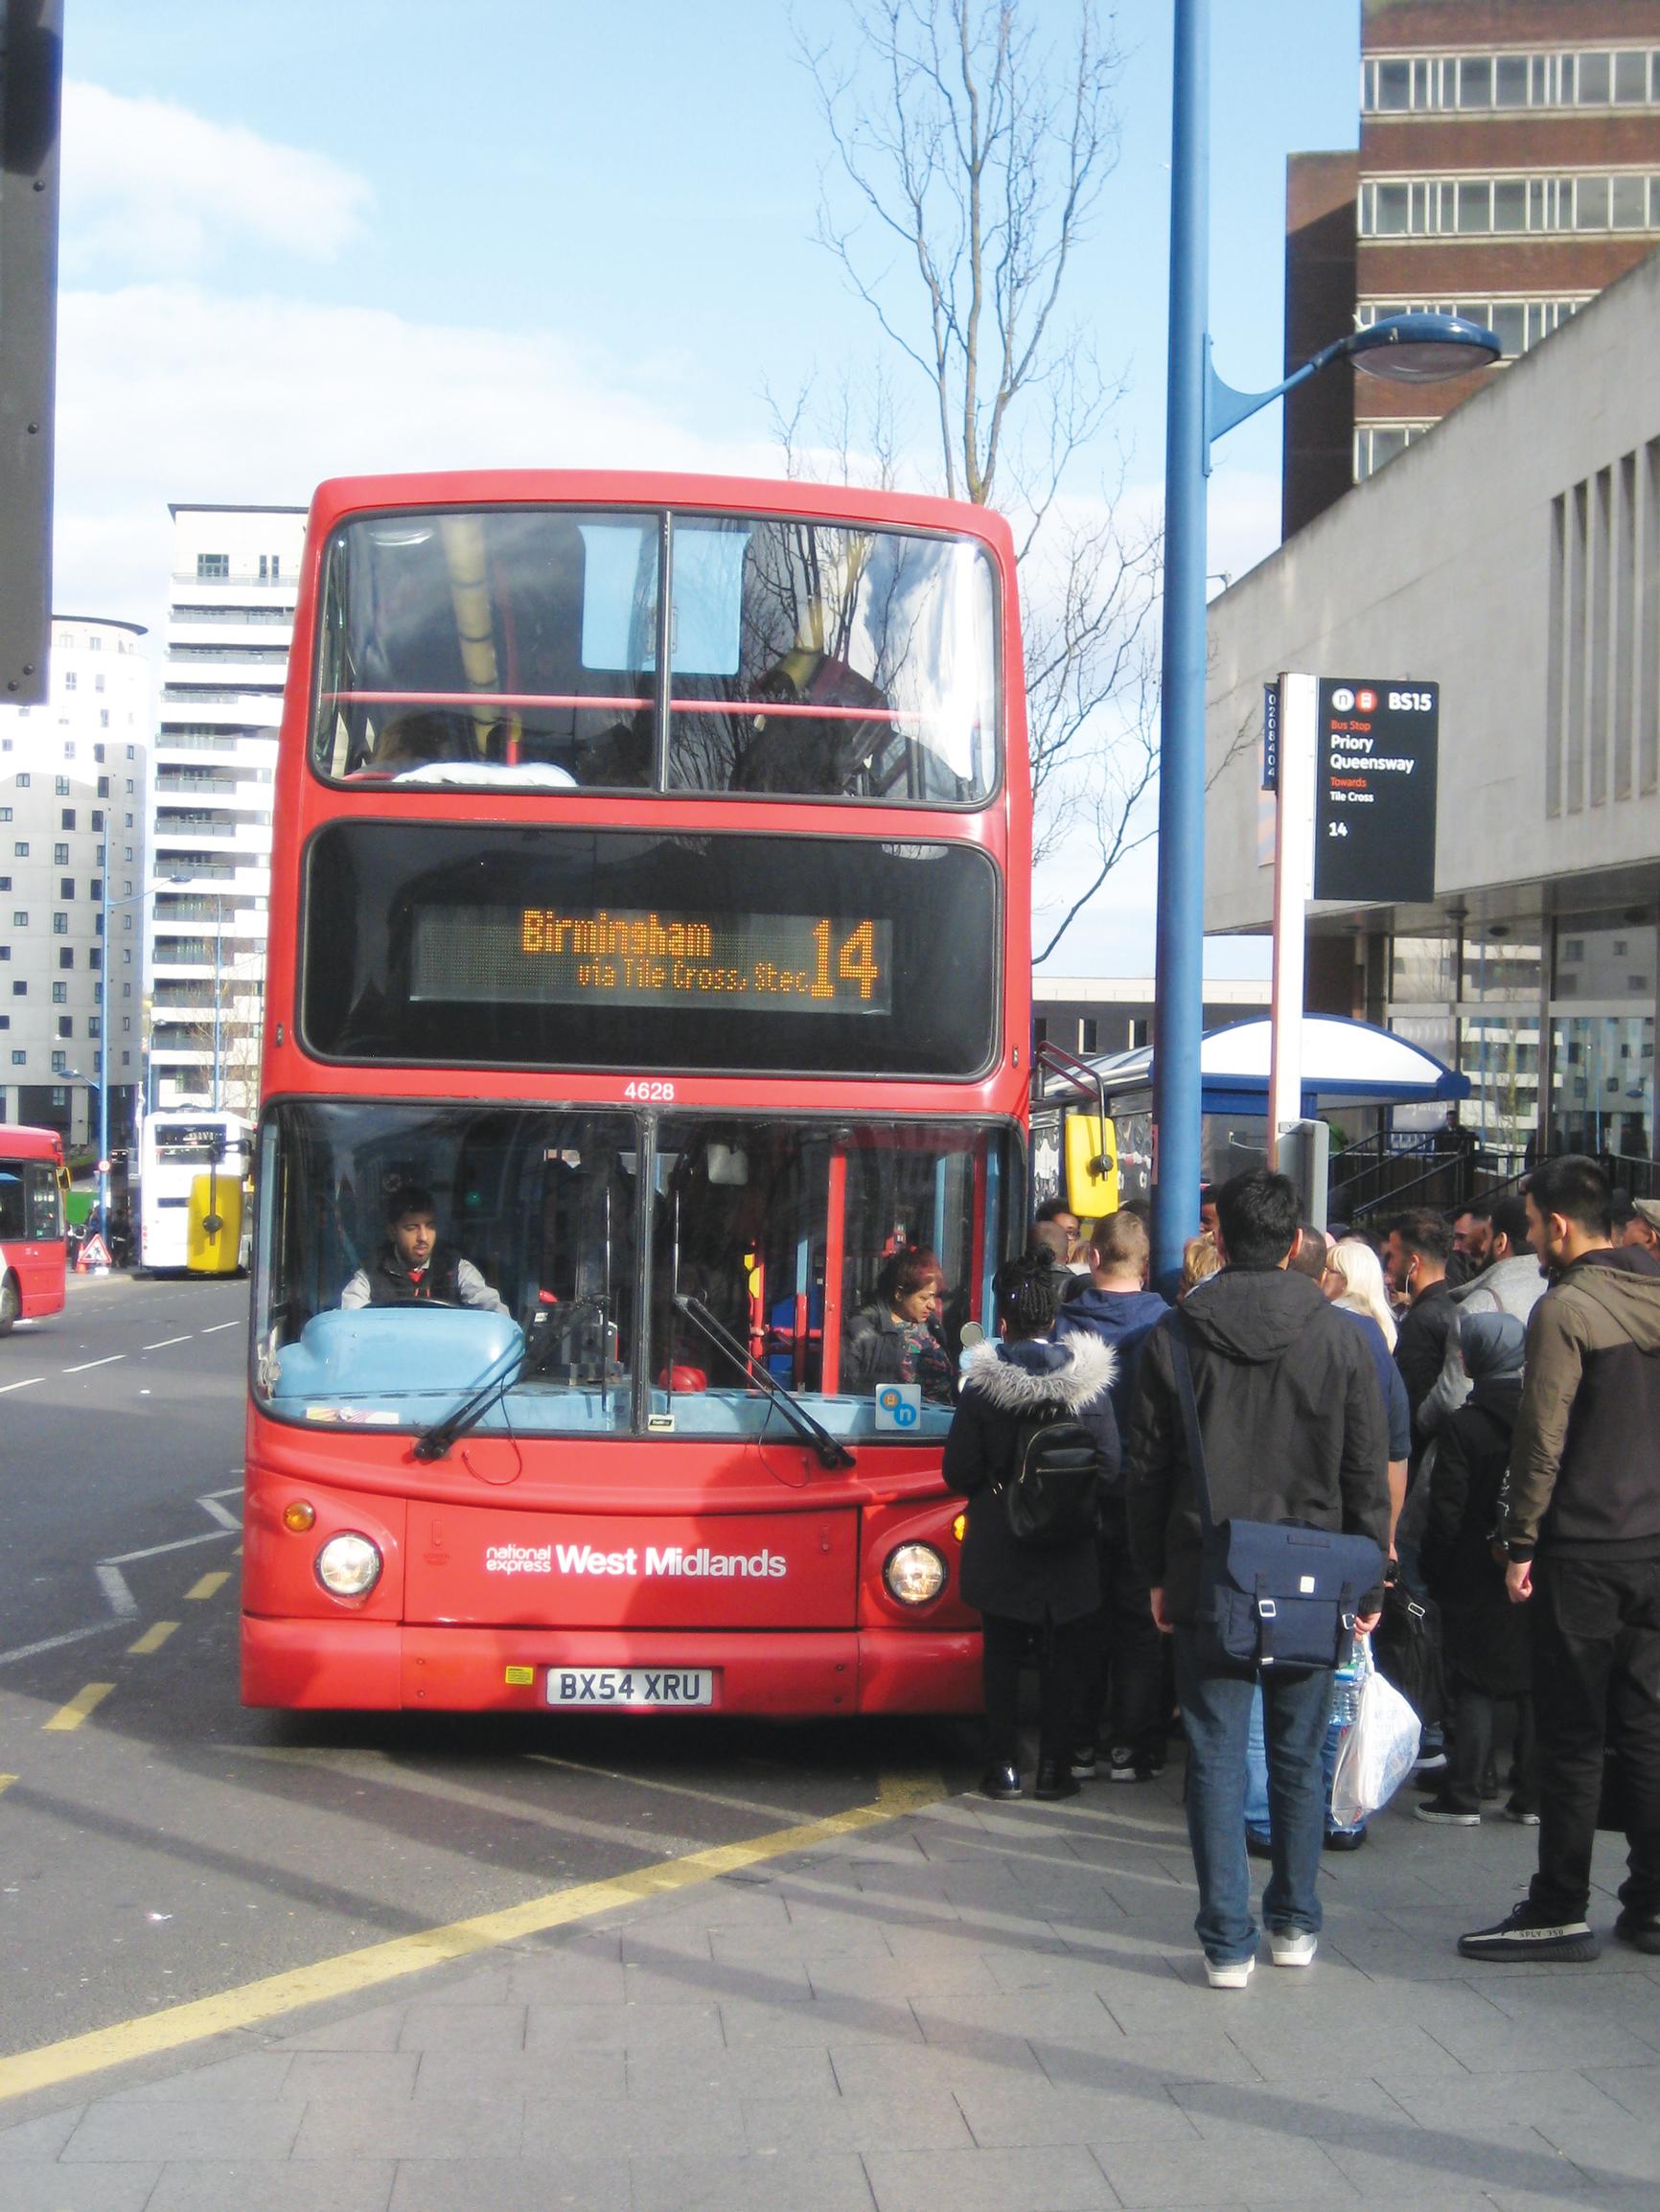 Funding urged to retrofit older buses with emissions reduction equipment